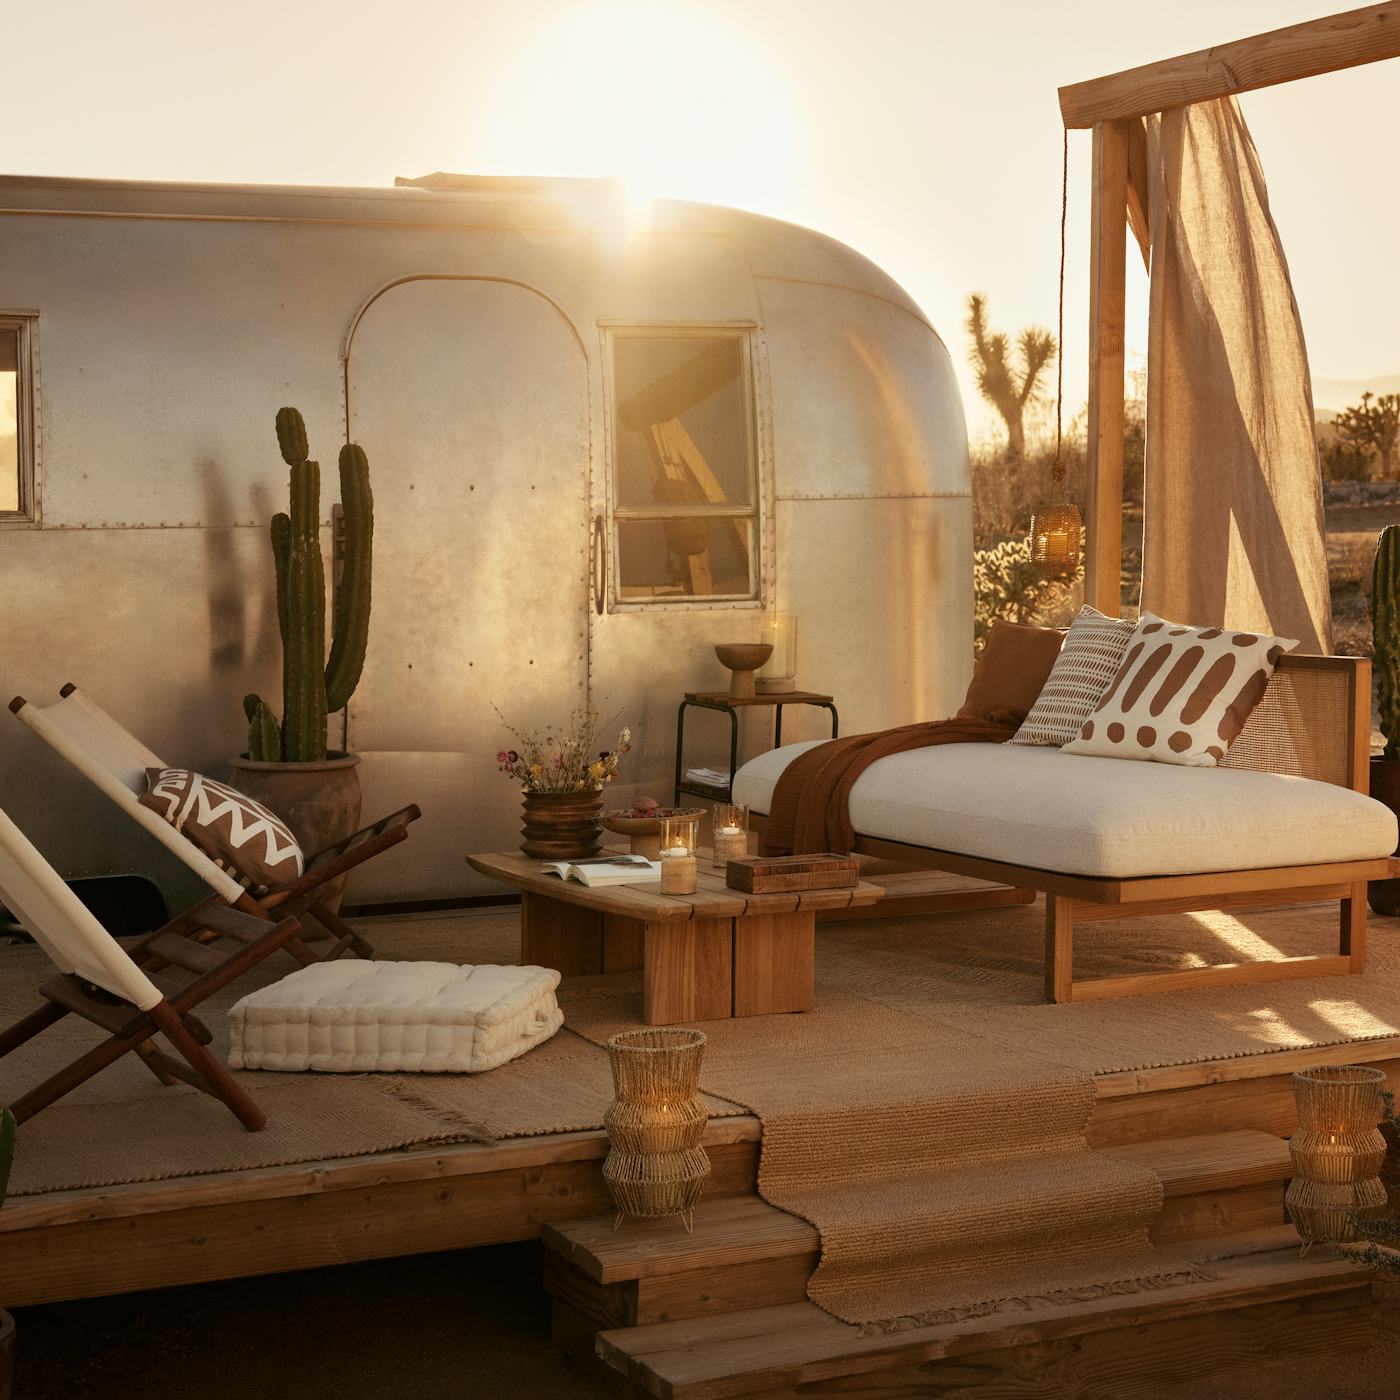 H&M's Latest Home Collection Is The Stylish Way To Experience Nature This Summer